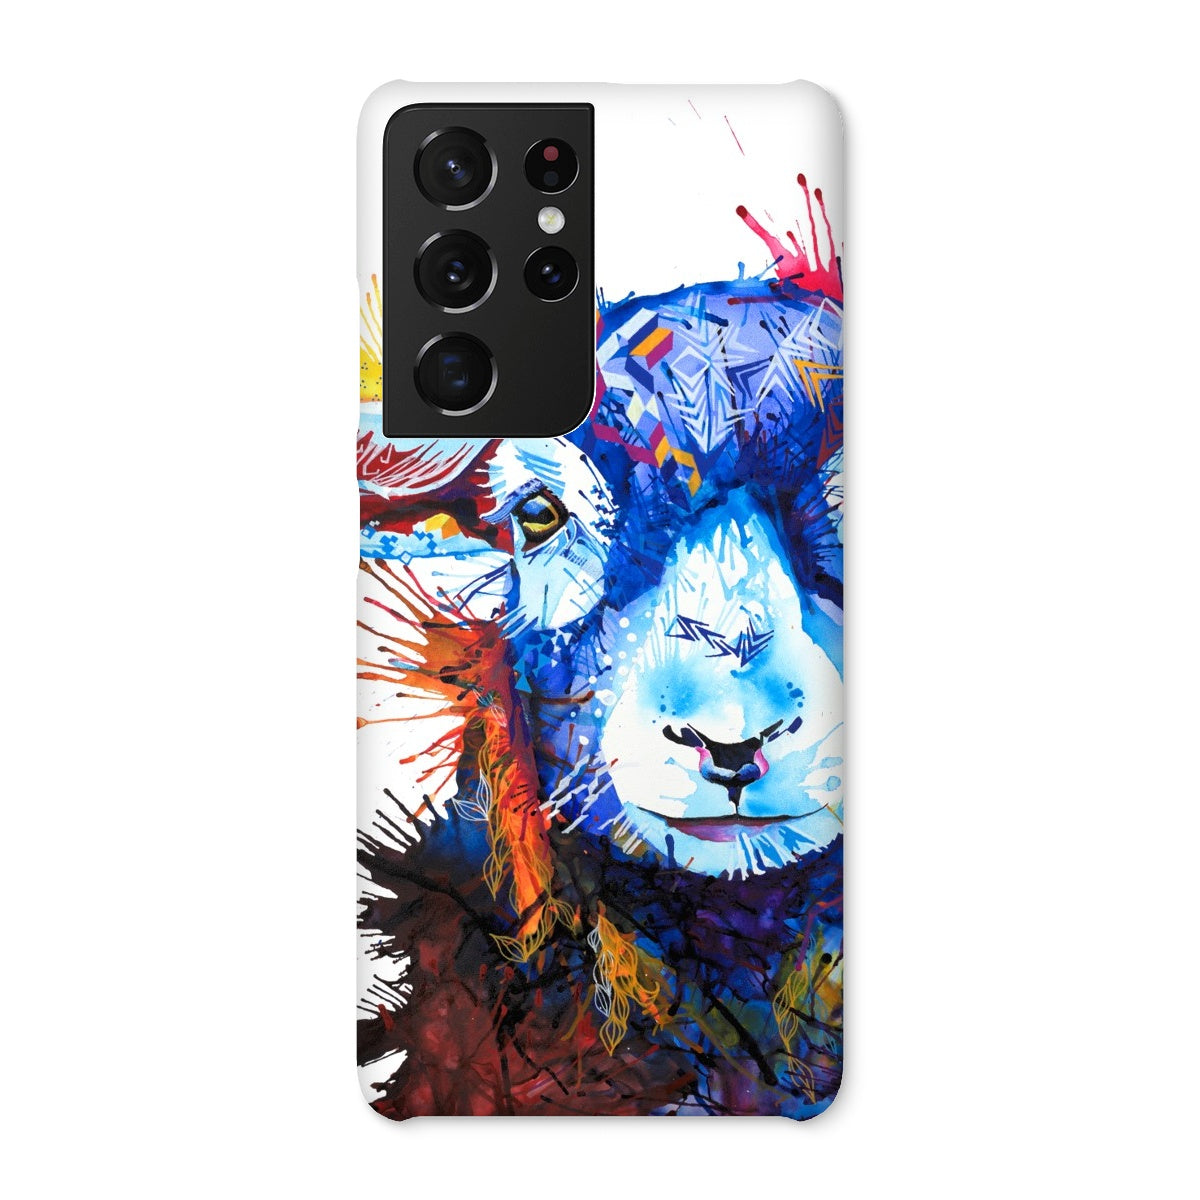 Florence the Sheep Phone Case